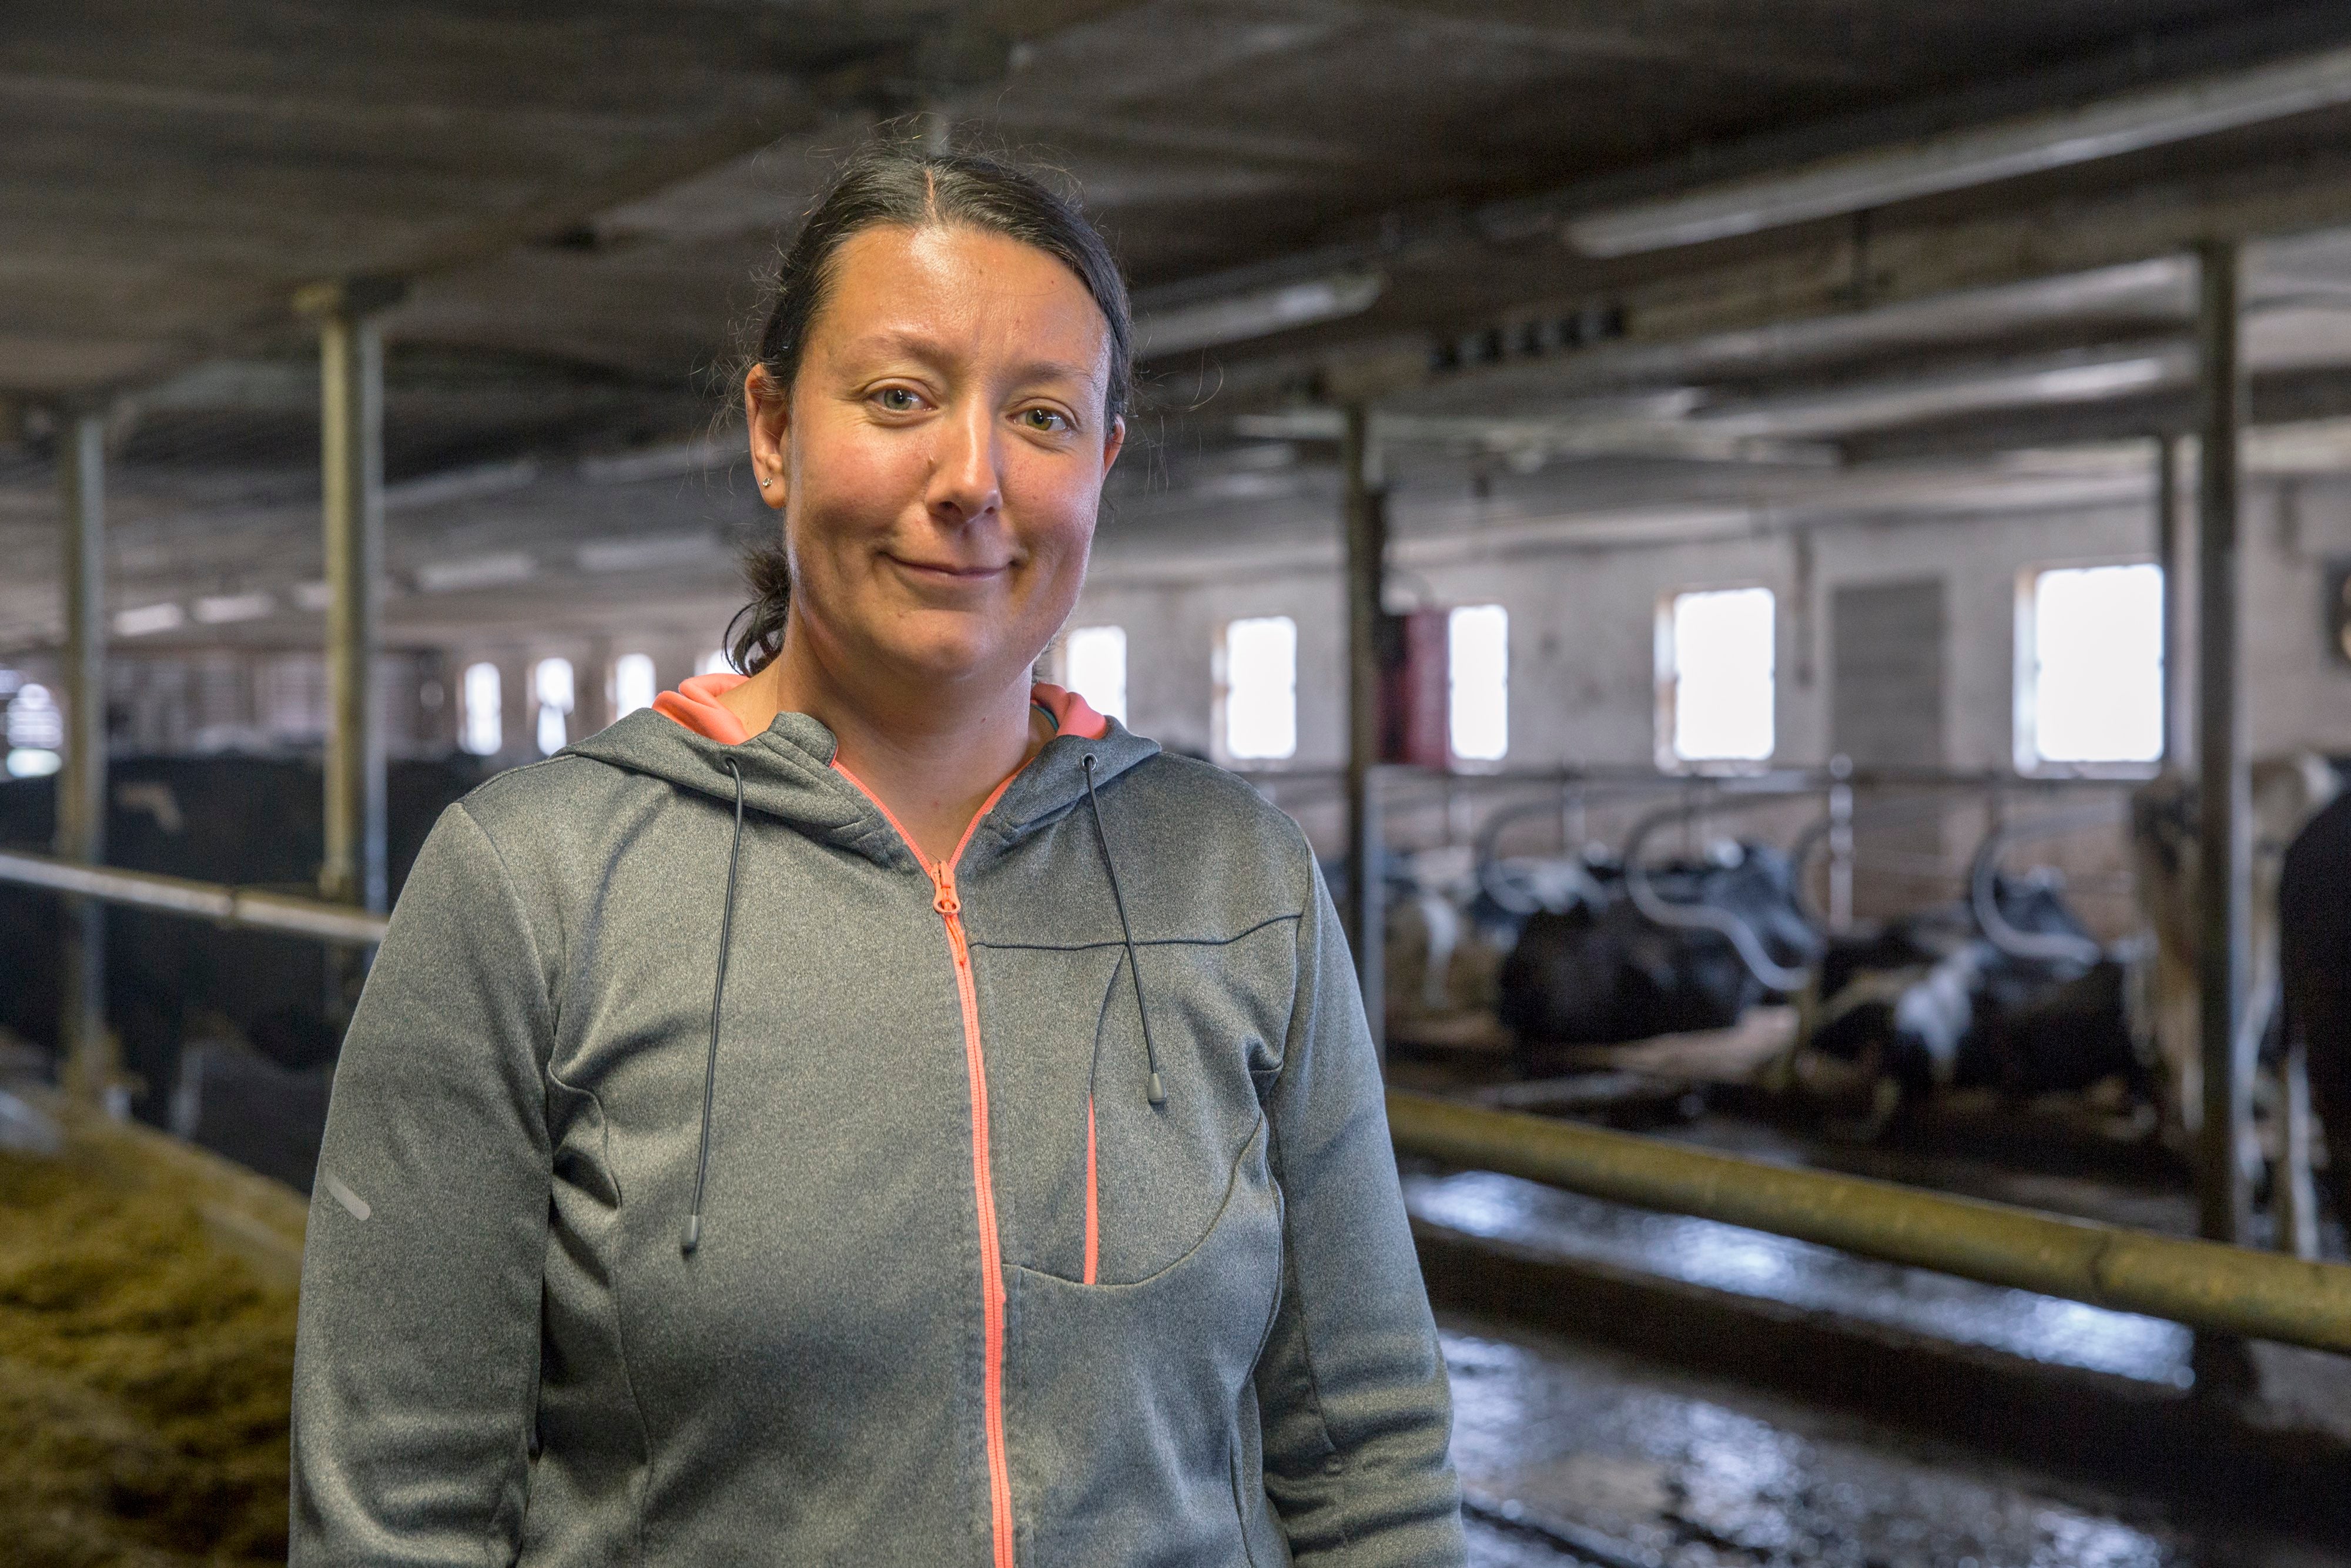 Bethany Coursen is a Centre County farmer and the president of the local Farm Bureau. Her farm milks cows and grows multiple crops. (Min Xian / Keystone Crossroads)